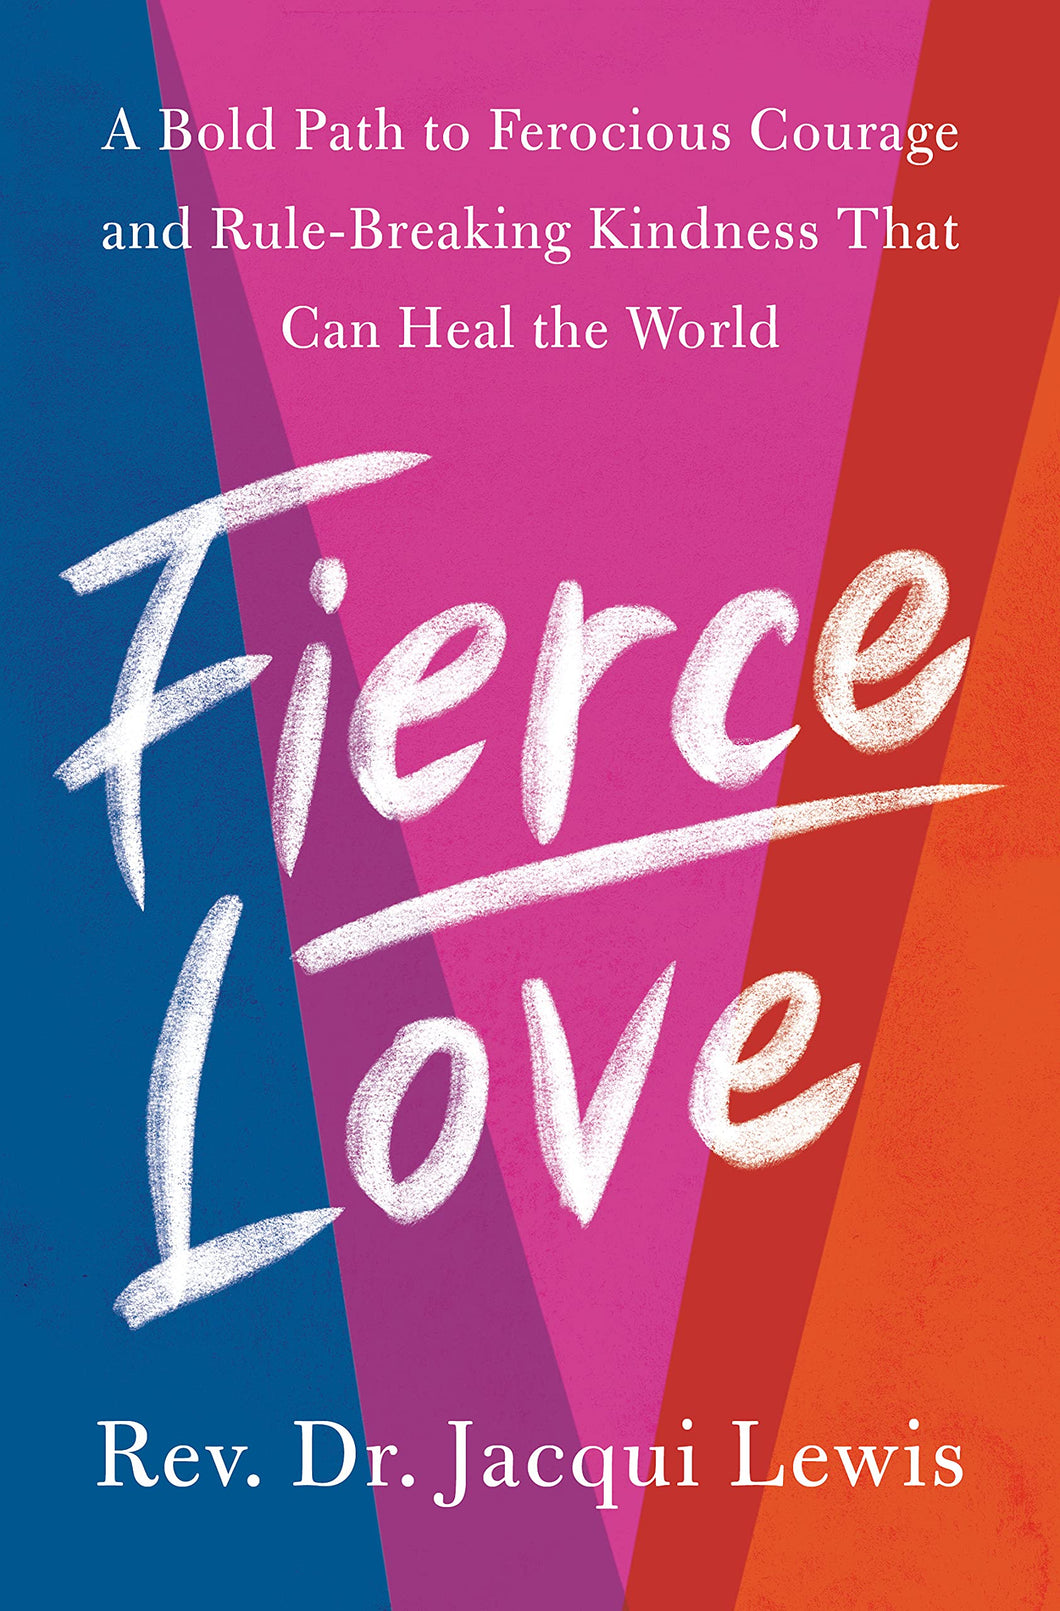 Fierce Love: A Bold Path to Ferocious Courage and Rule-Breaking Kindness That Can Heal the World